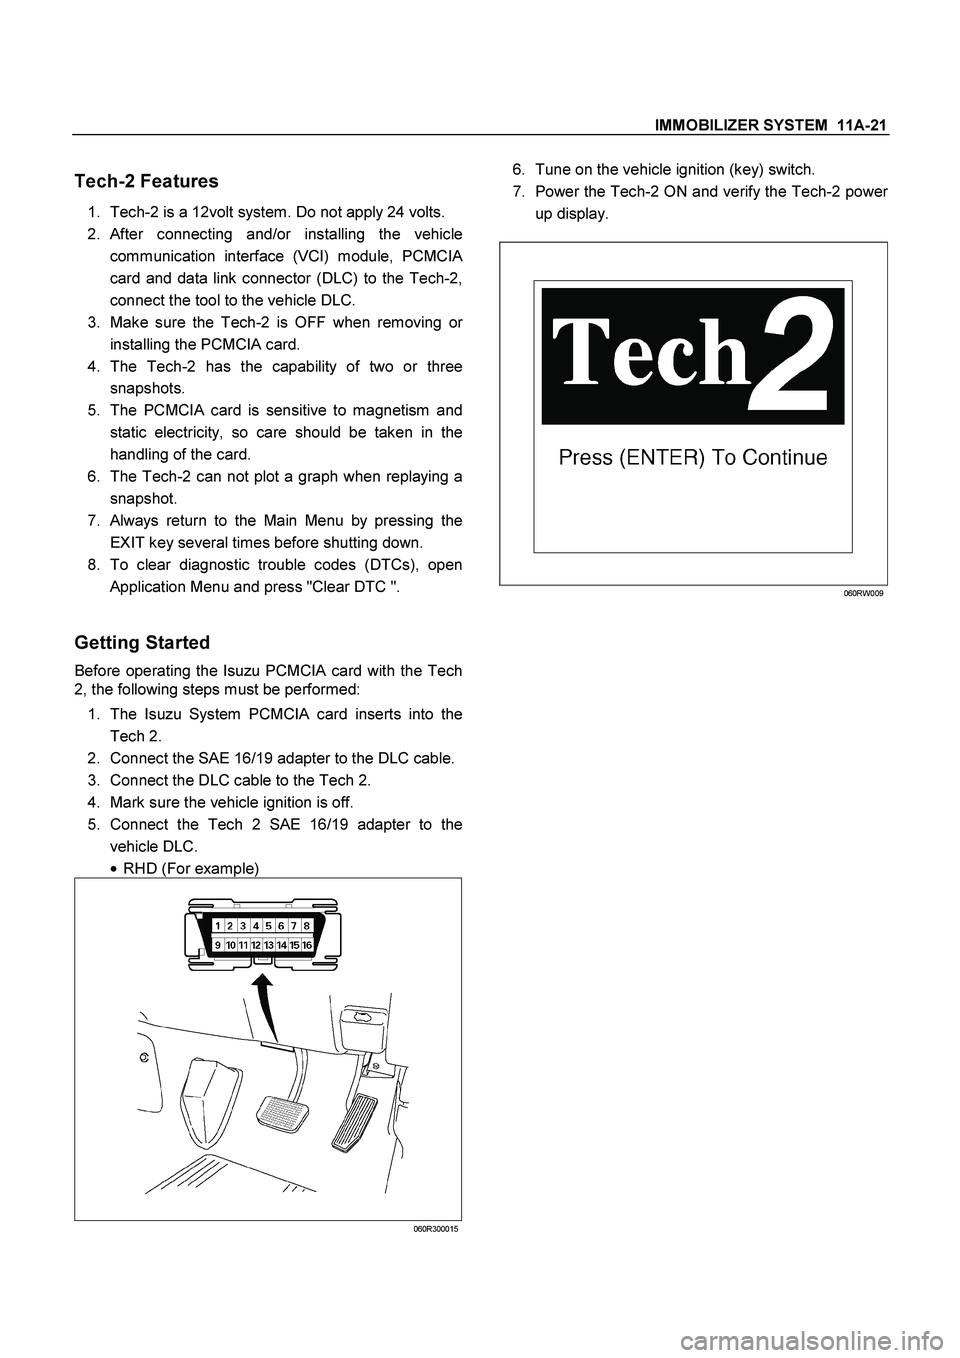 ISUZU TF SERIES 2004  Workshop Manual IMMOBILIZER SYSTEM  11A-21
 
Tech-2 Features 
1. 
Tech-2 is a 12volt system. Do not apply 24 volts. 
2. 
After connecting and/or installing the vehicle
communication interface (VCI) module, PCMCI
A
ca